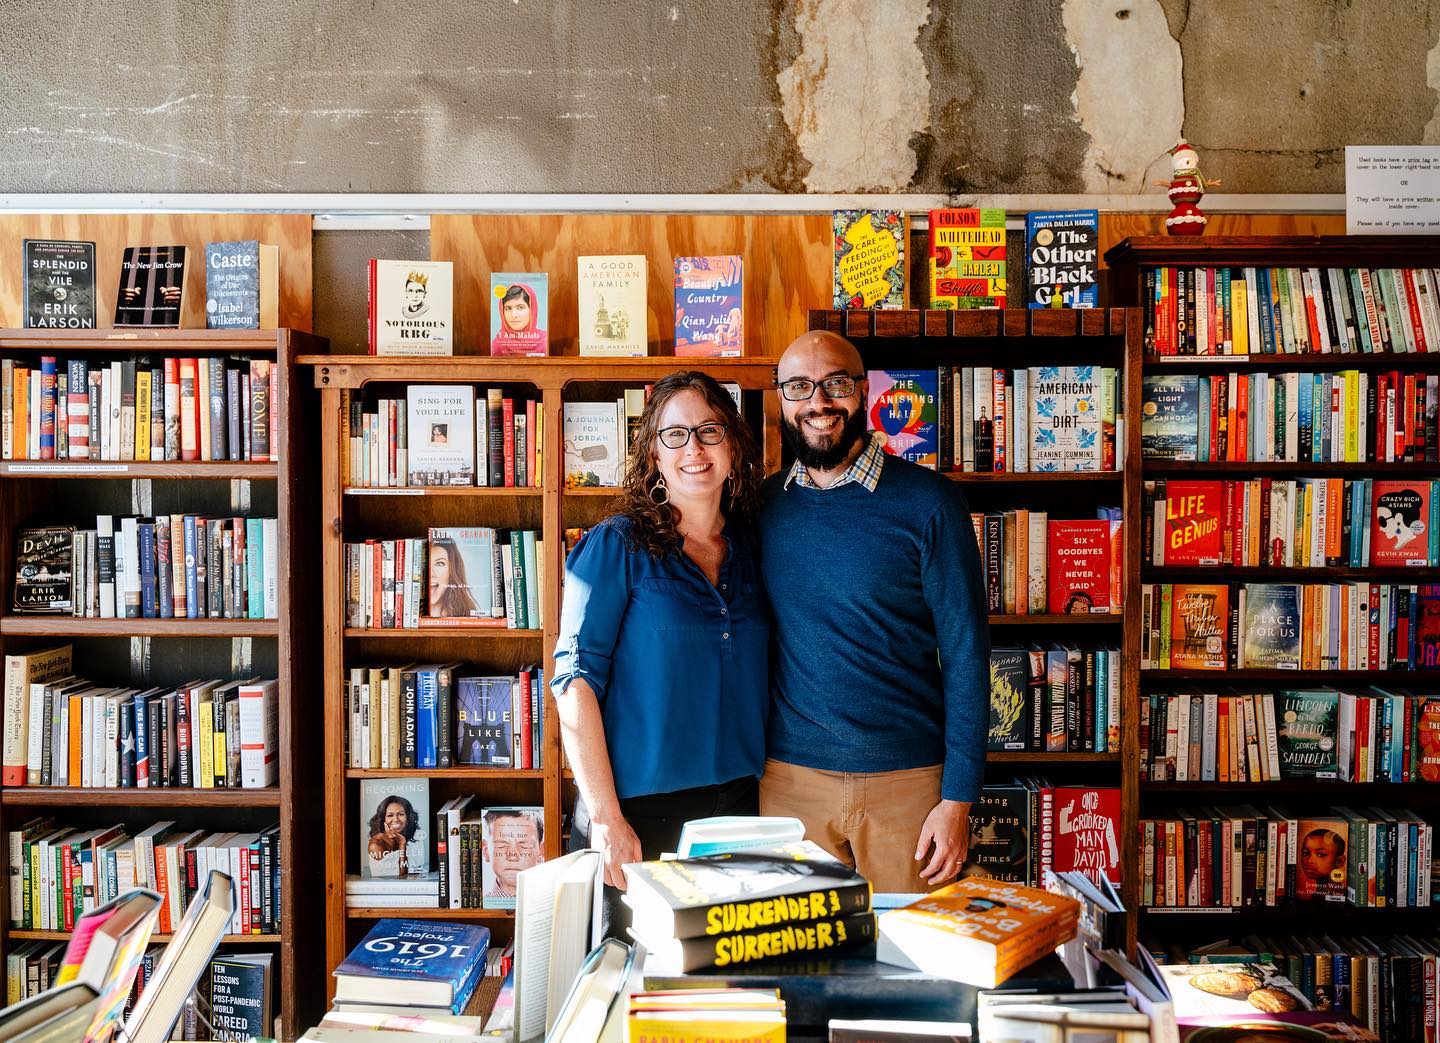 Grosse Pointe, Mich., Pop-up Bookstore Extending Stay